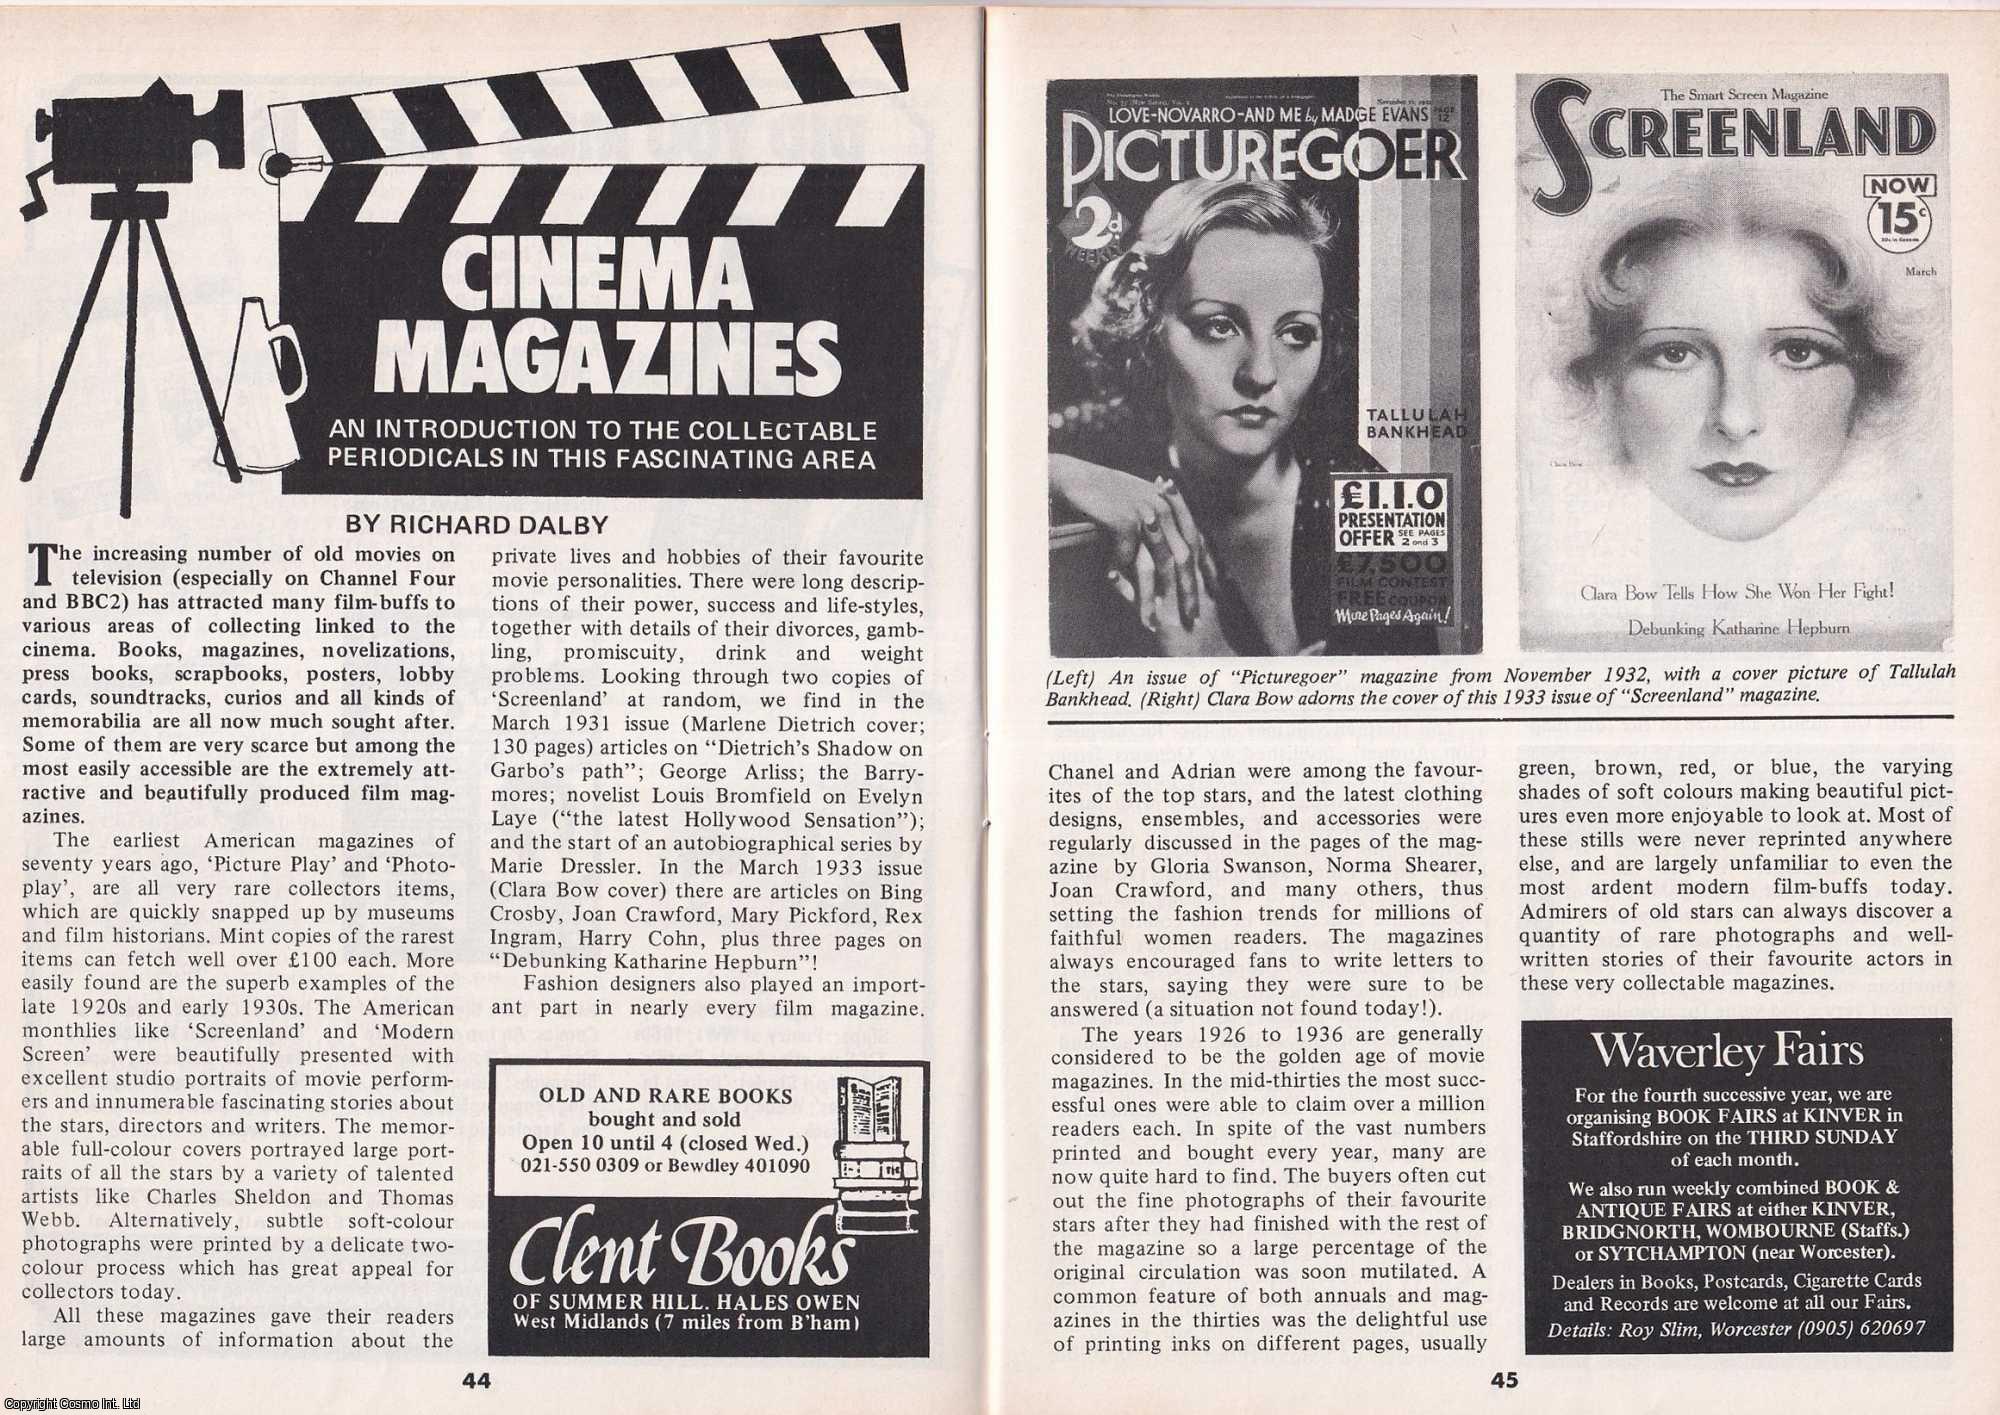 Richard Dalby - Cinema Magazines : An Introduction to The Collectable Periodicals in This Fascinating Area. This is an original article separated from an issue of The Book & Magazine Collector publication.